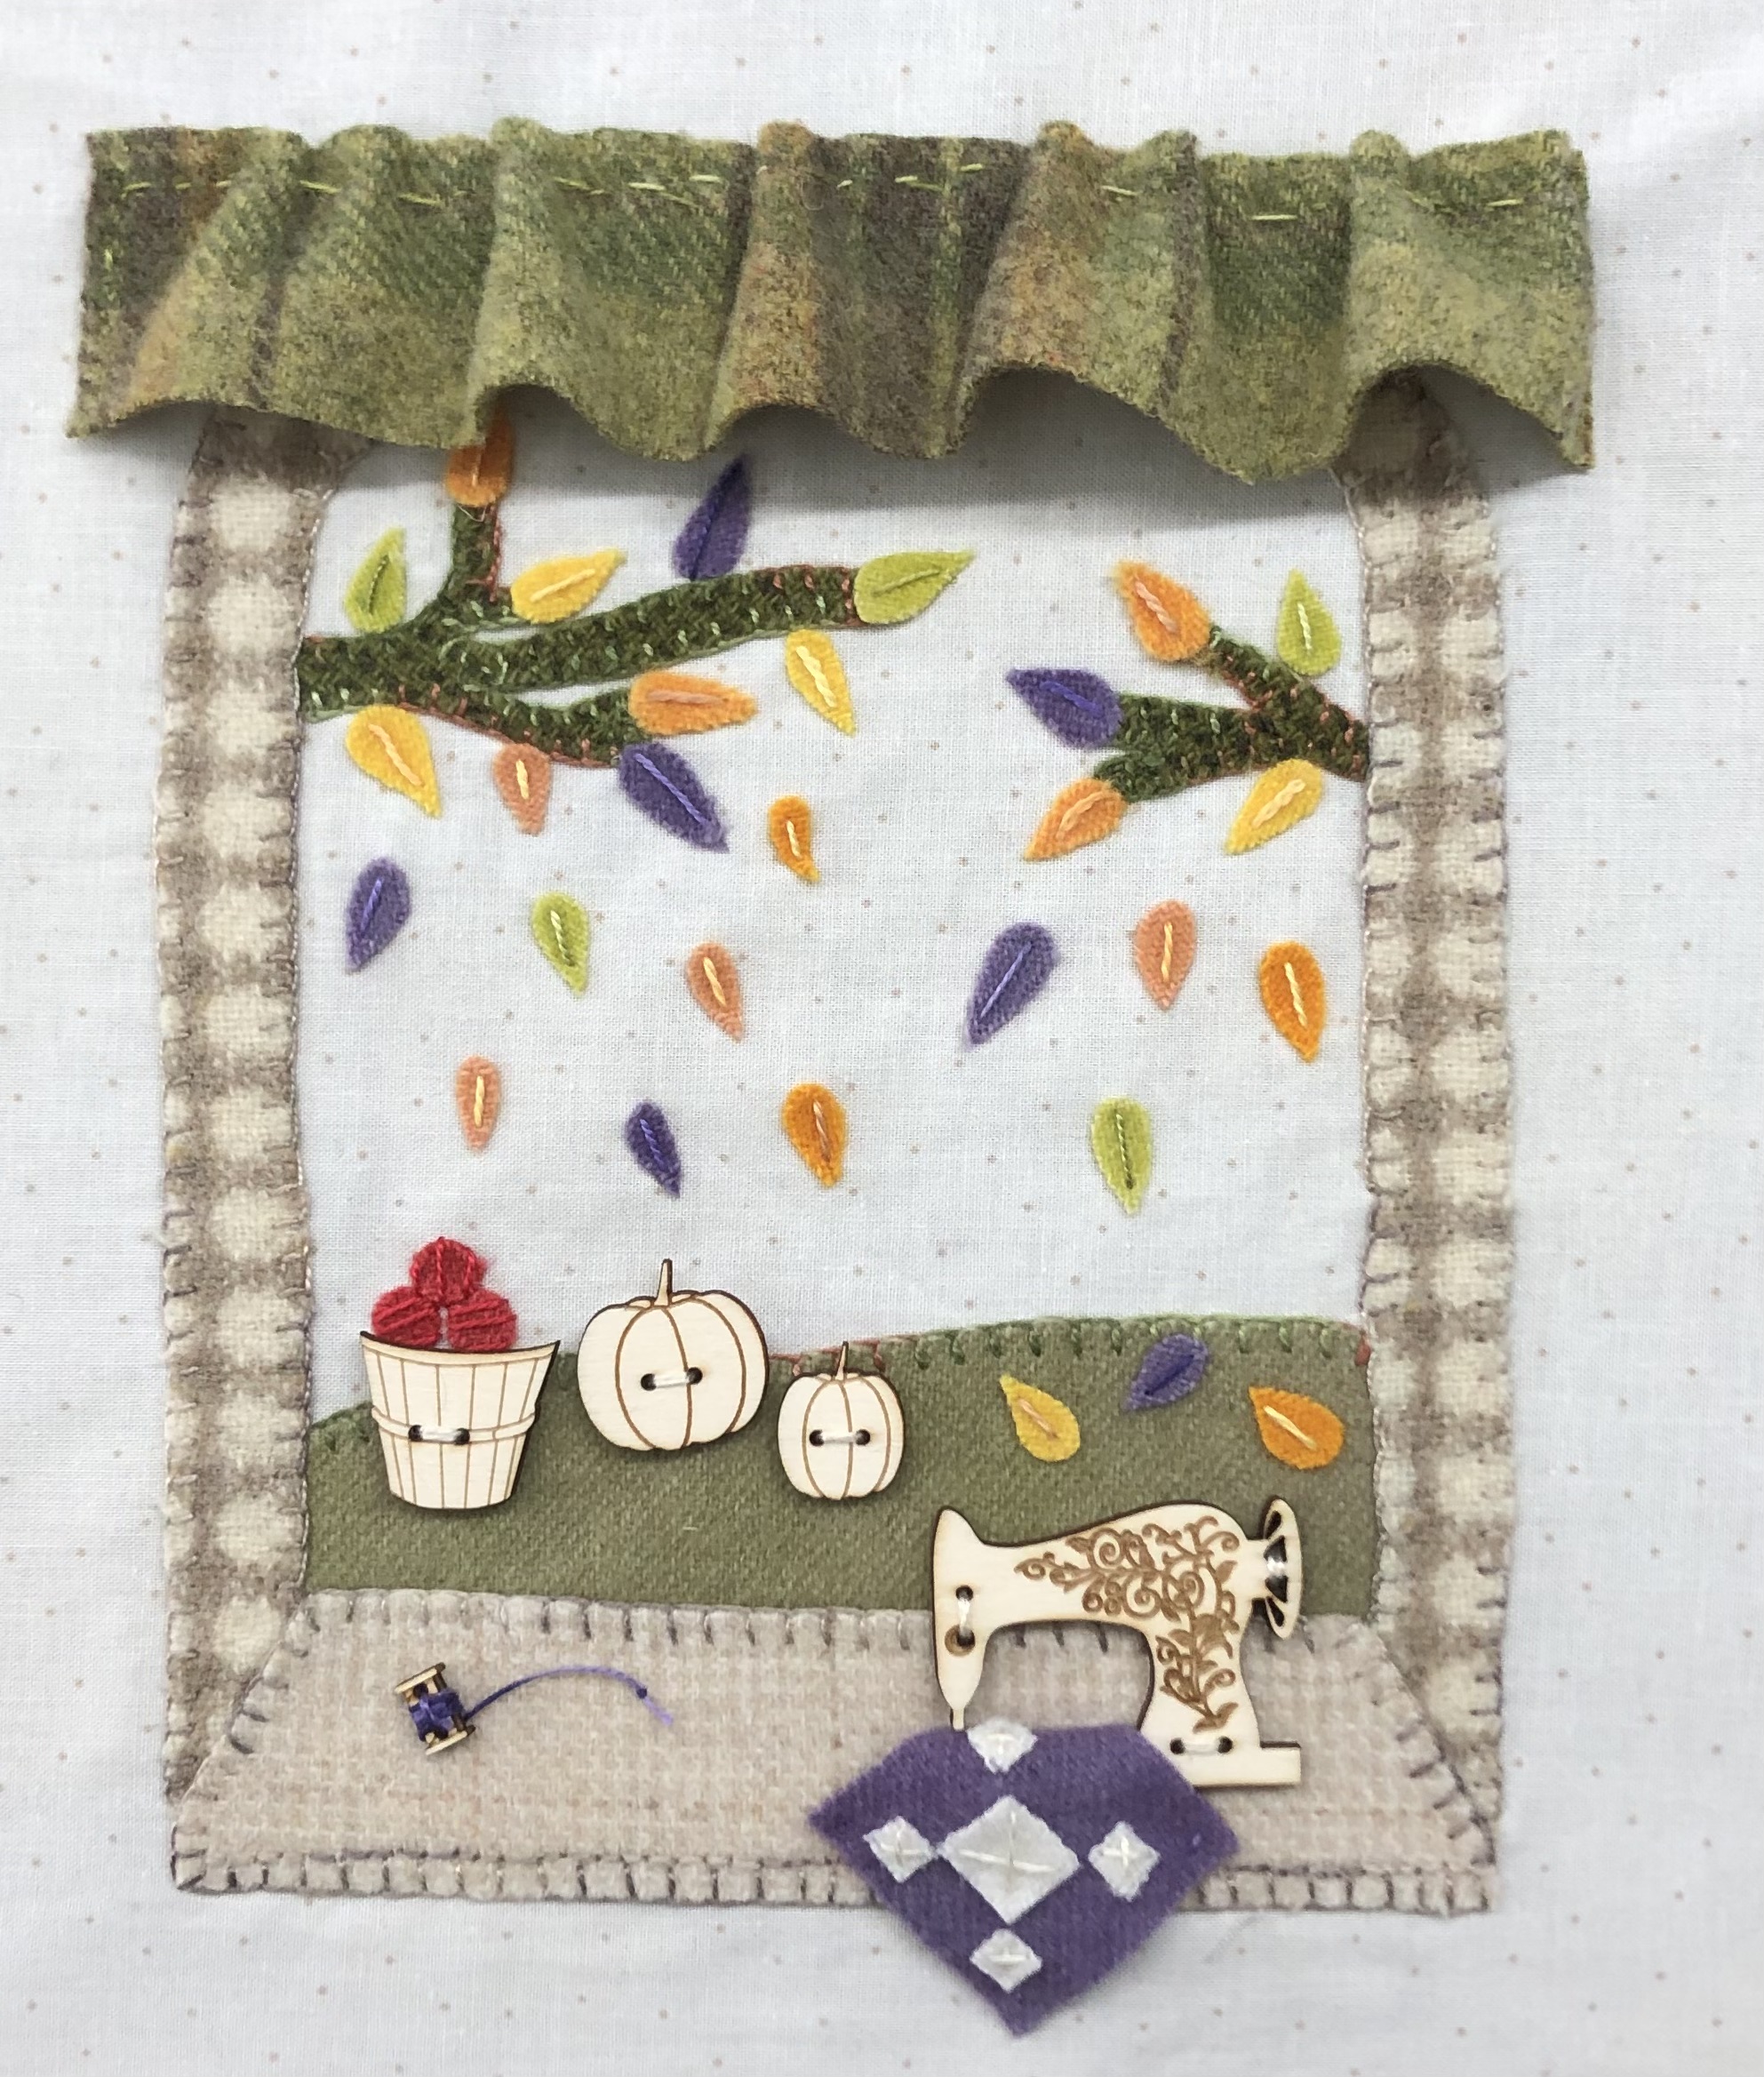 Mary Jane & Friends - The Autumn Windows Ladies - BLOCK 1 - AUTUMN SEWING TIME - PATTERN DIGIITAL DOWNLOAD 